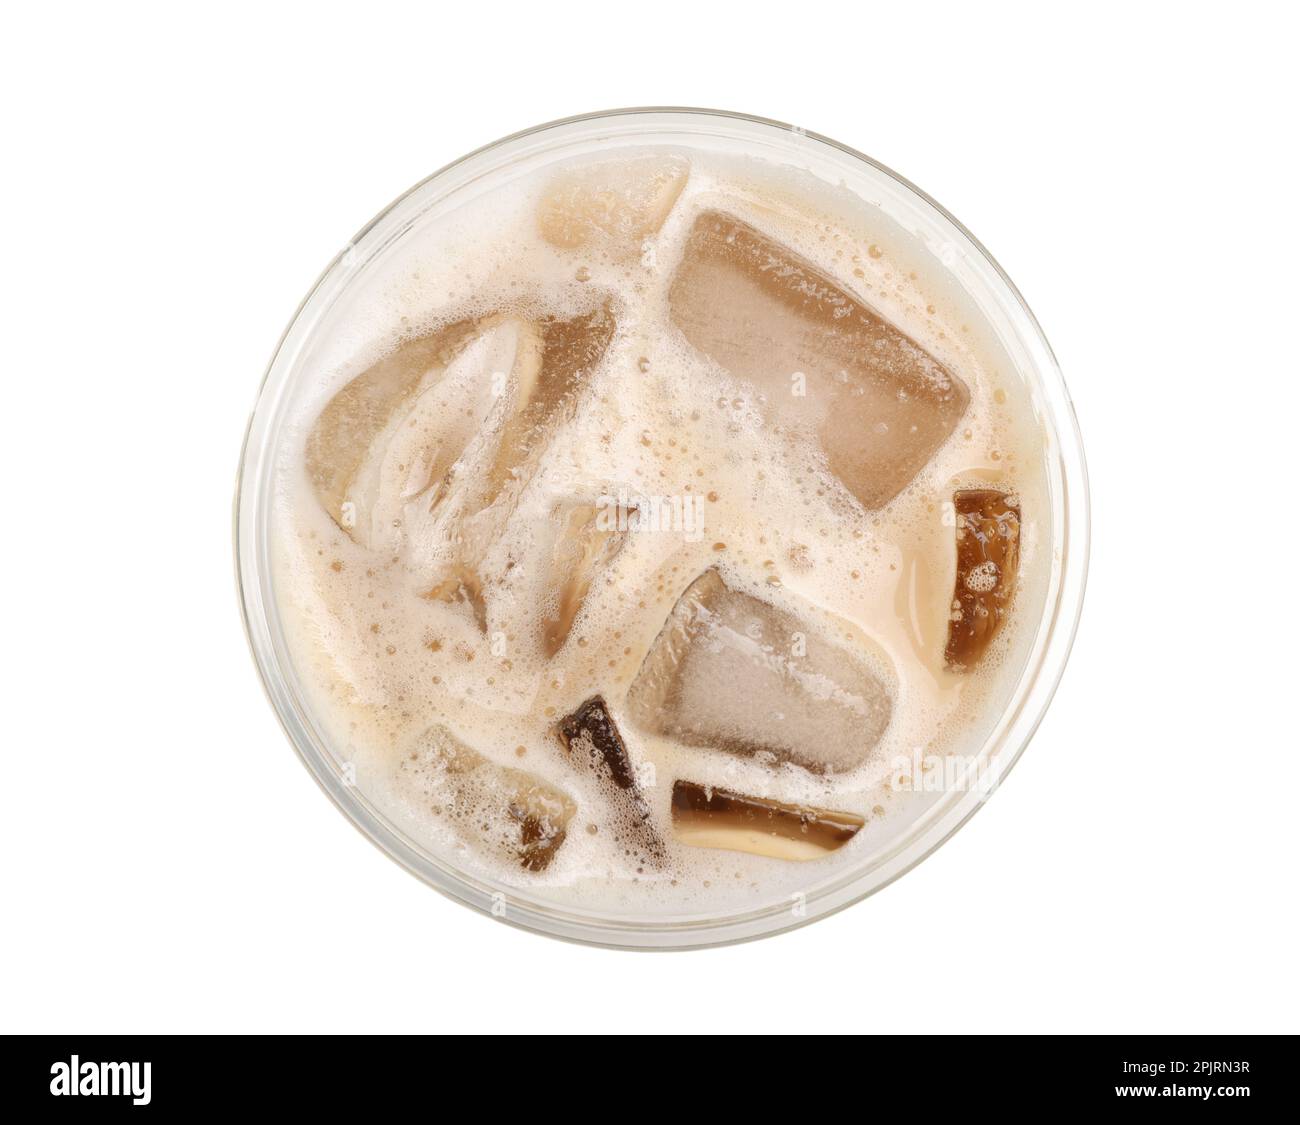 https://c8.alamy.com/comp/2PJRN3R/takeaway-plastic-cup-with-cold-coffee-drink-isolated-on-white-top-view-2PJRN3R.jpg